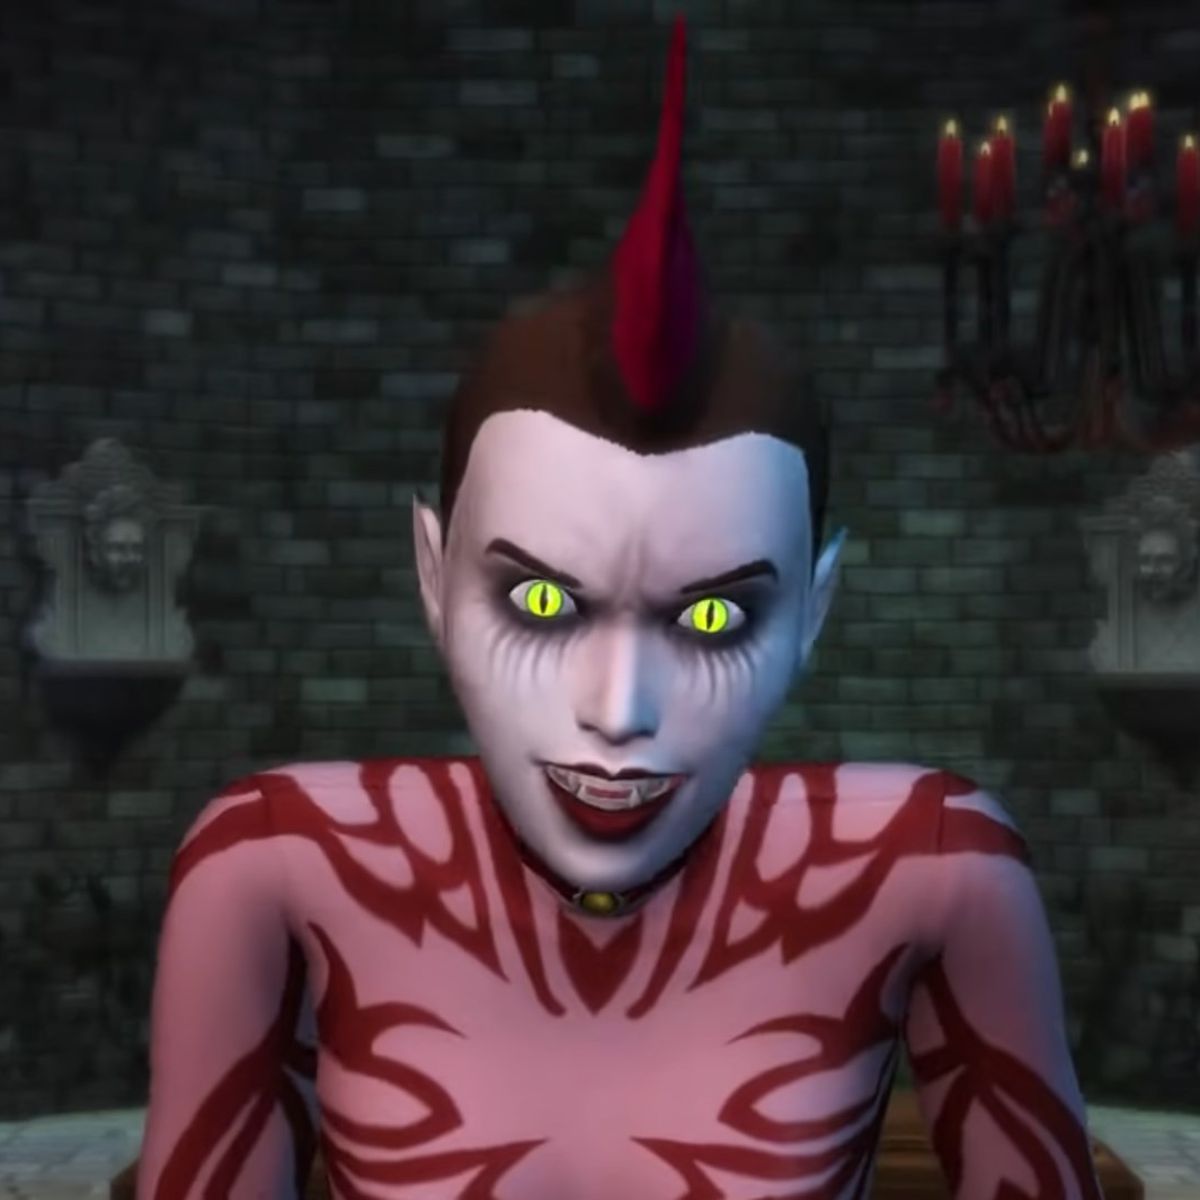 A Vampire Sim with green eyes and a mohawk cackles